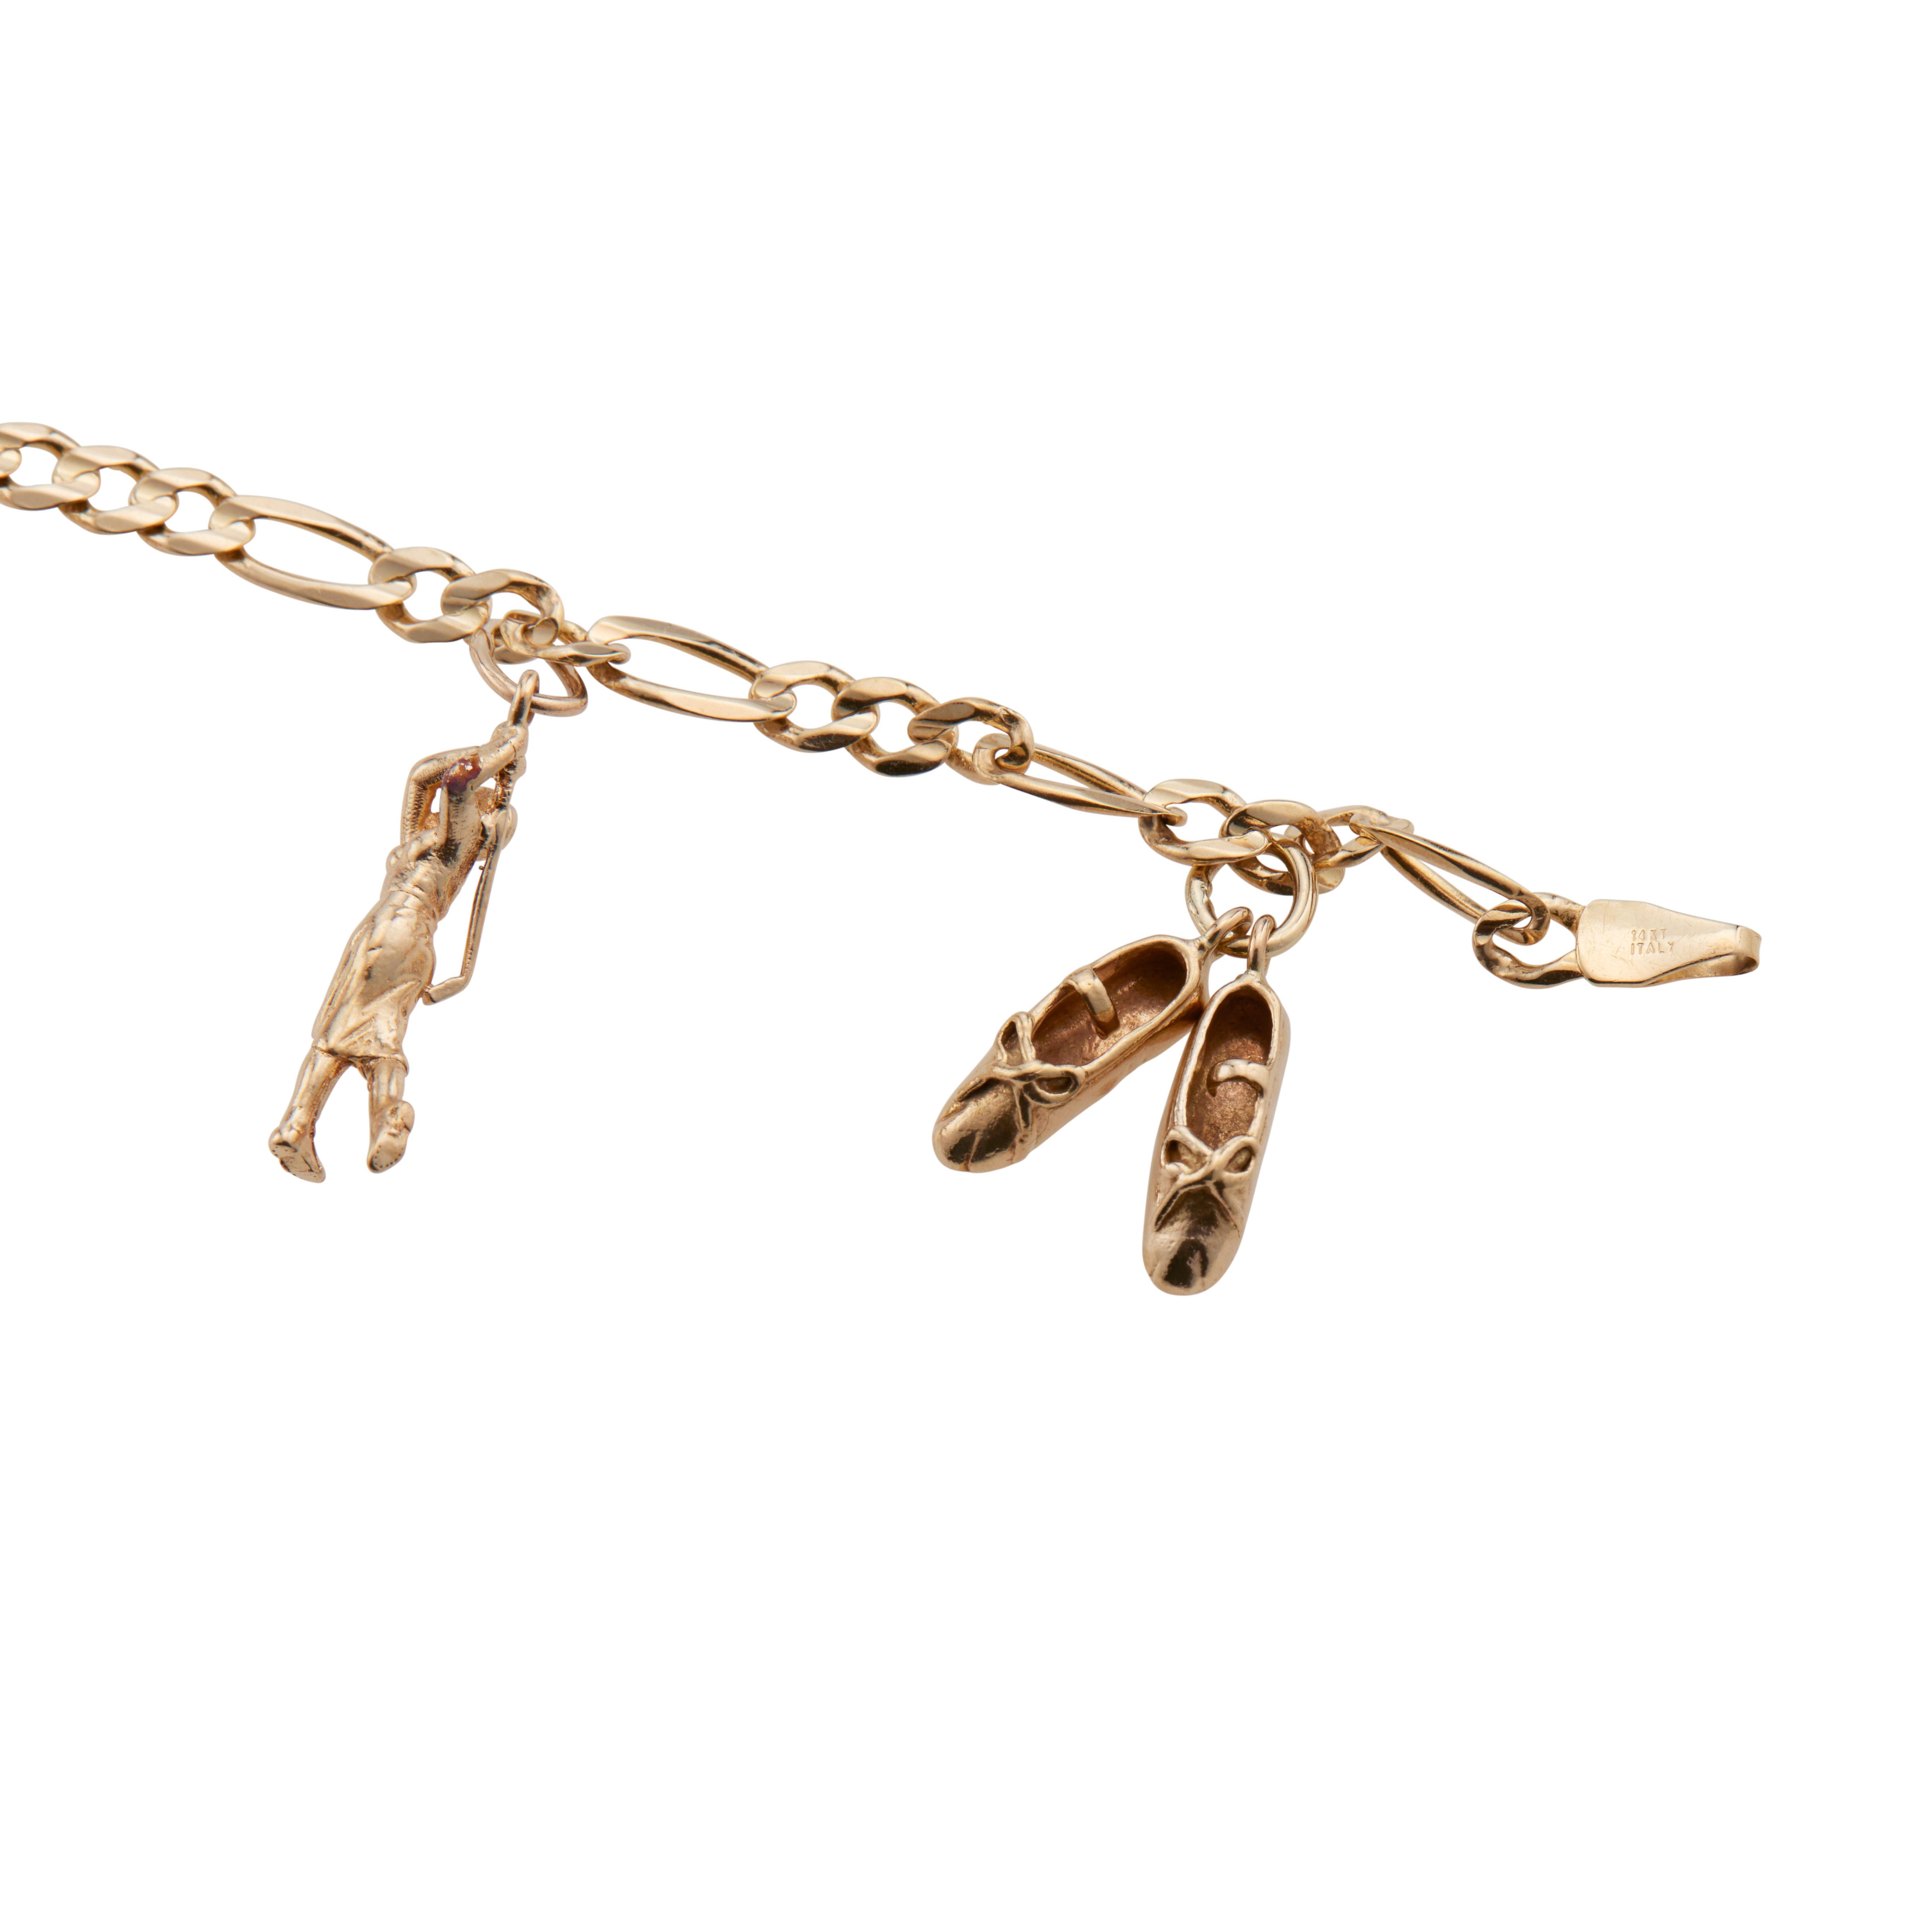 1960's Sport Motif 14k yellow gold charm bracelet. Ballet shoes, lady golfer, bowler, ice skated, riding boot and cap charms. 7.5 inches in length. 

14k yellow gold 
Stamped: 14k
13.6 grams
Bracelet: 7.5 Inches
Width: 3.9mm
Thickness/depth: 1.1mm

